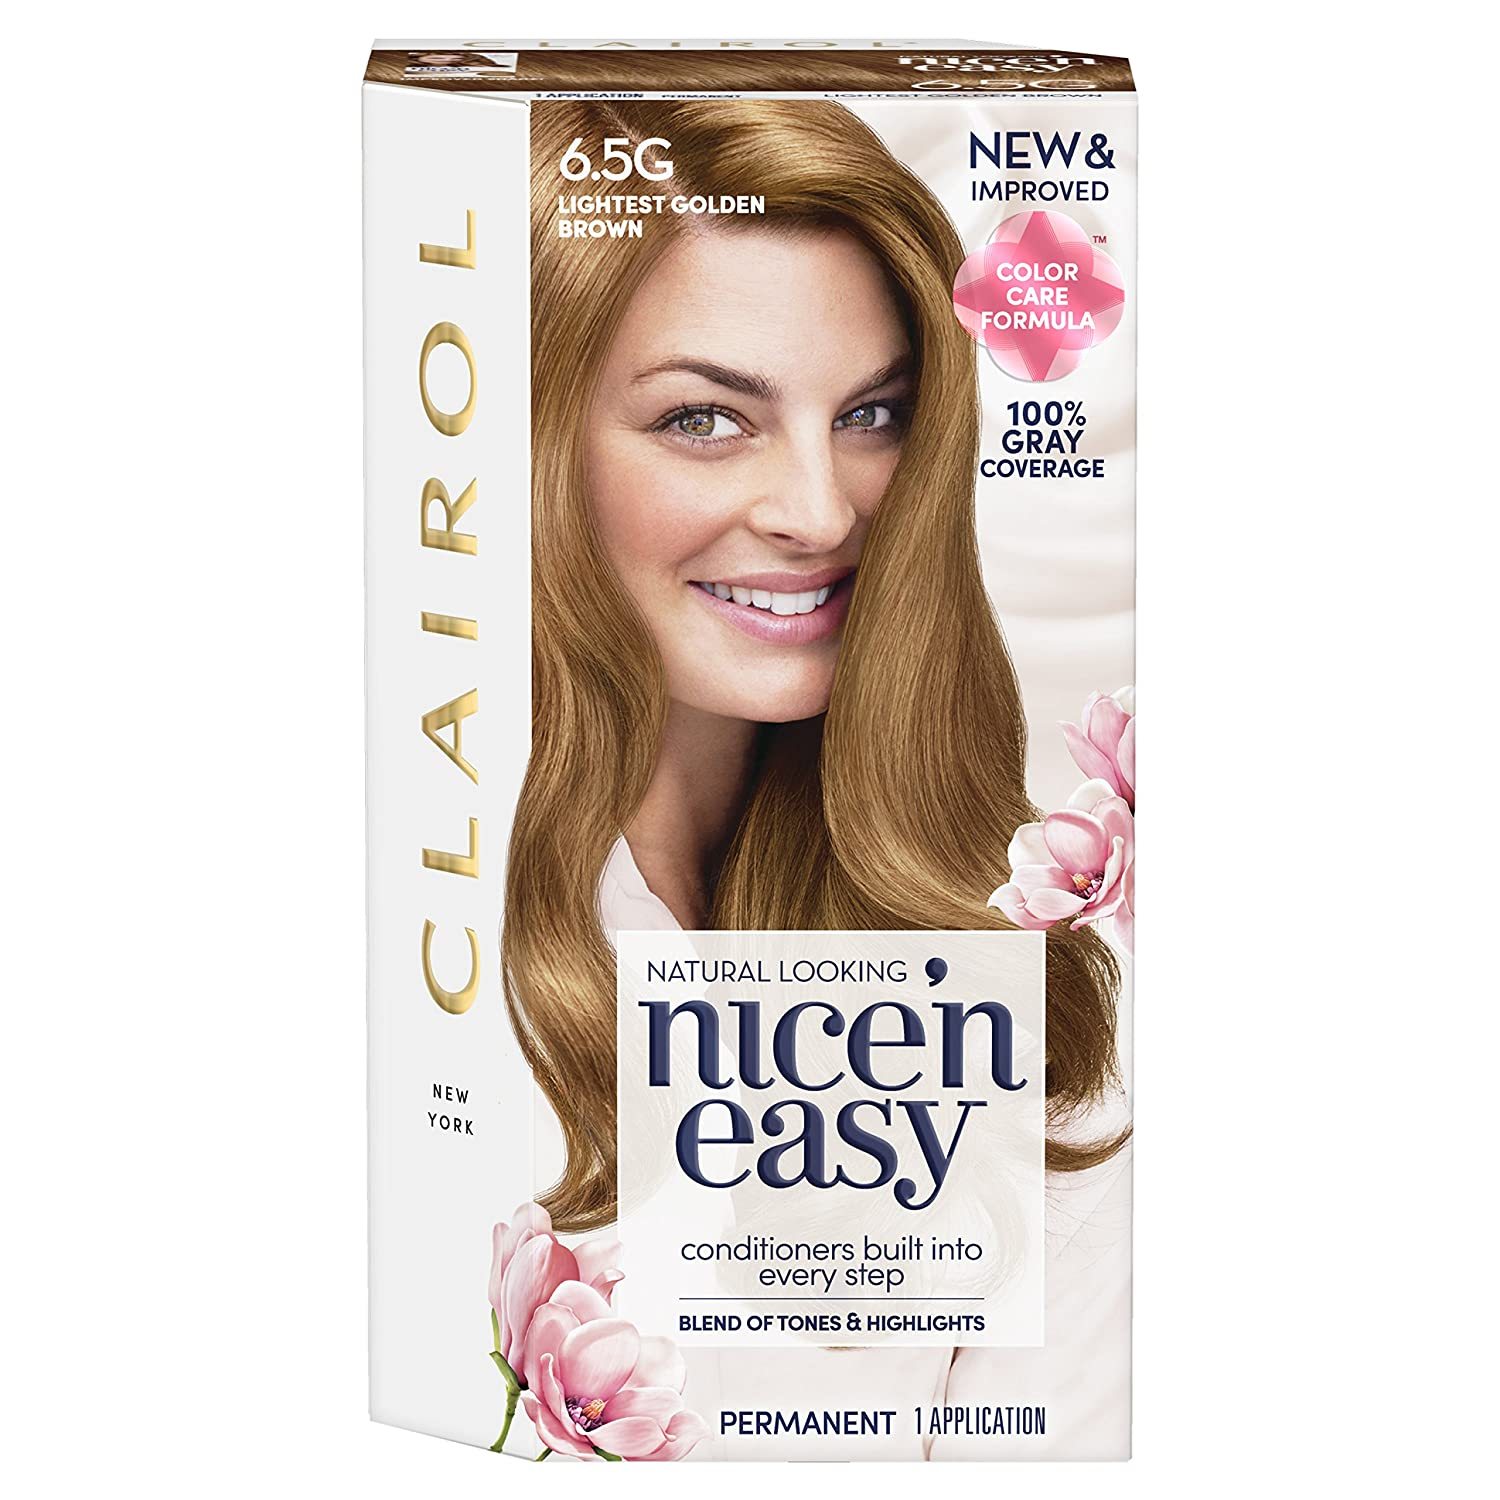 New Clairol Nice' n Easy Permanent Hair Color, #6.5G Lightest Golden Brown